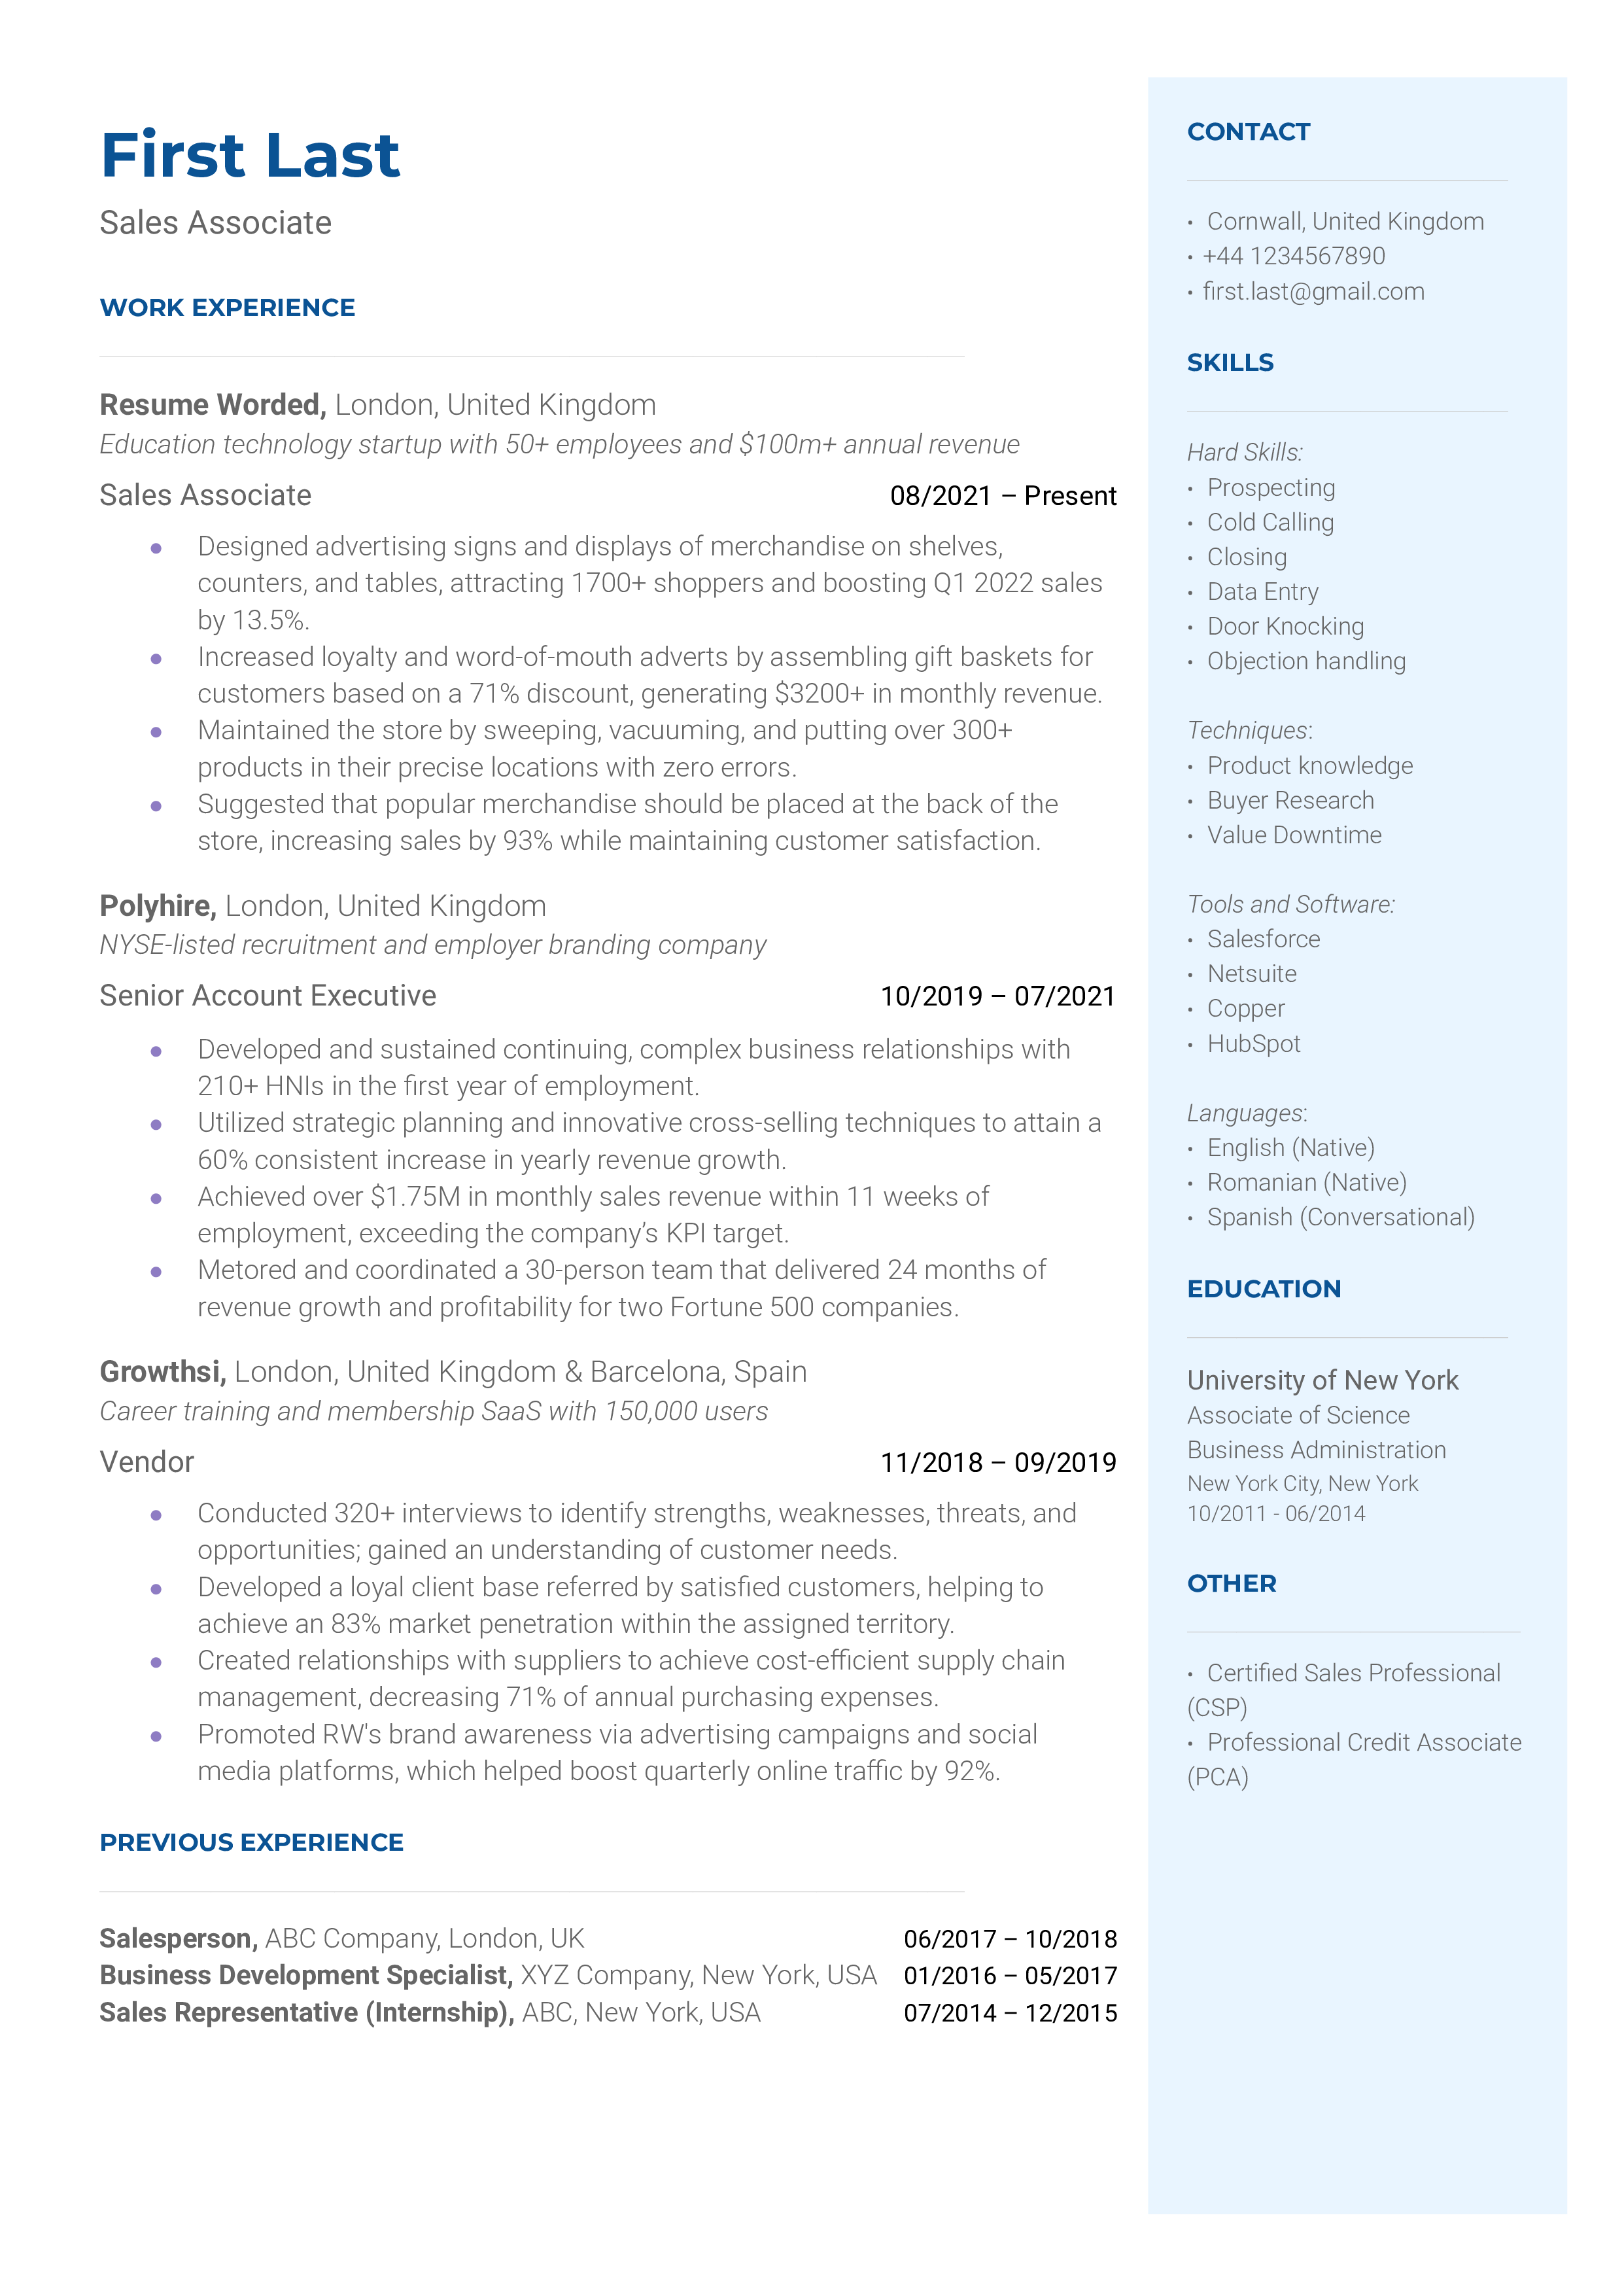 Sales Associate resume with experience and skills highlighted